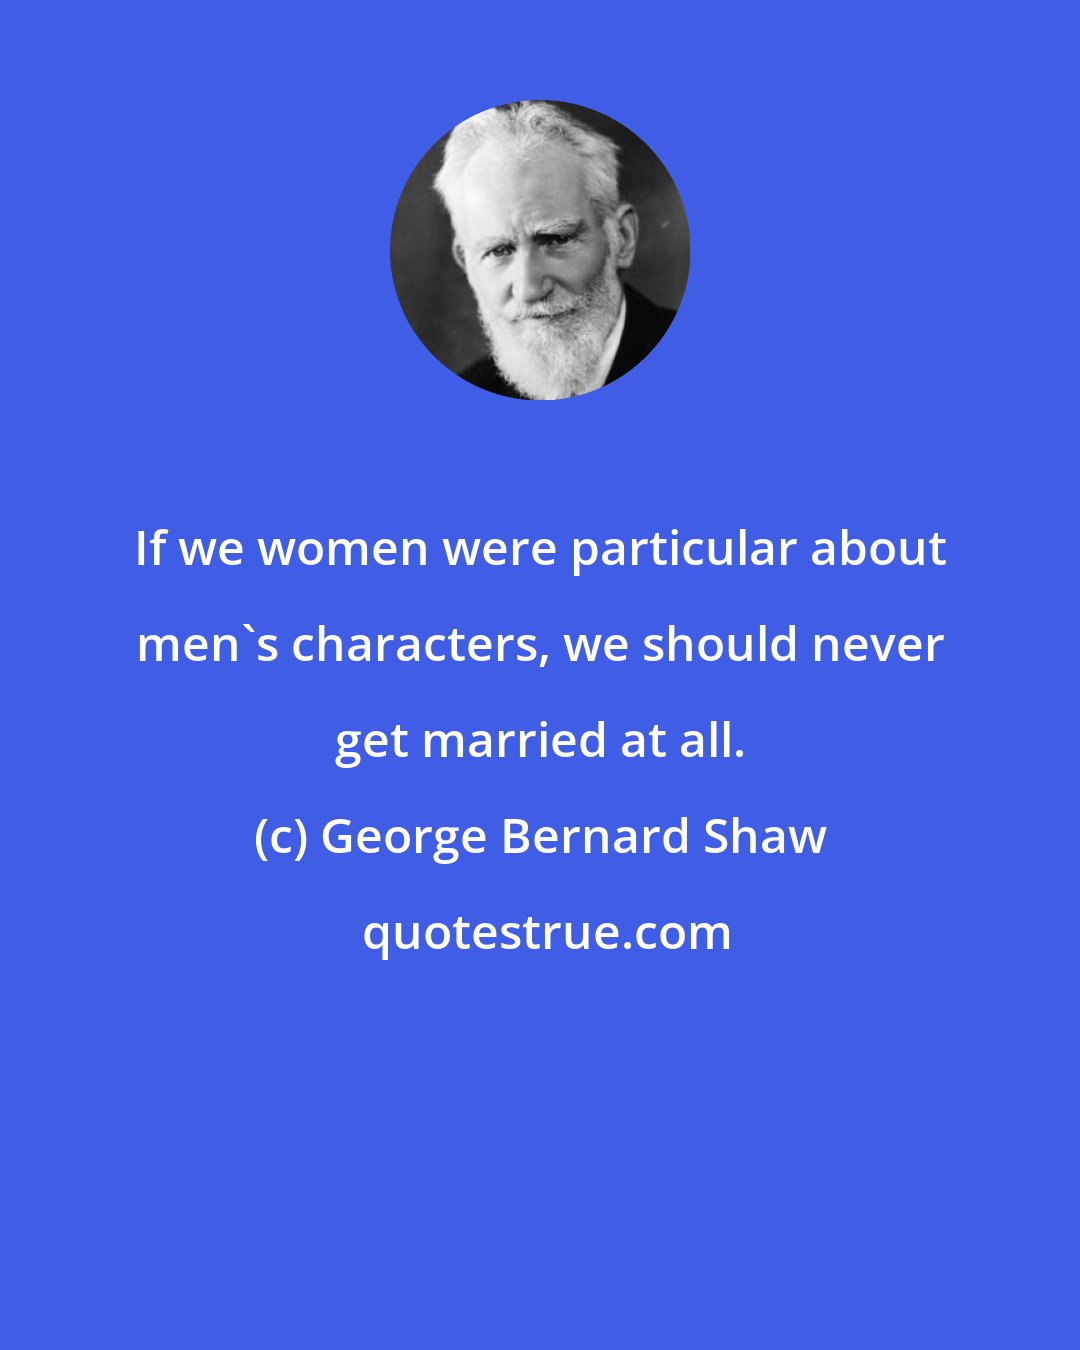 George Bernard Shaw: If we women were particular about men's characters, we should never get married at all.